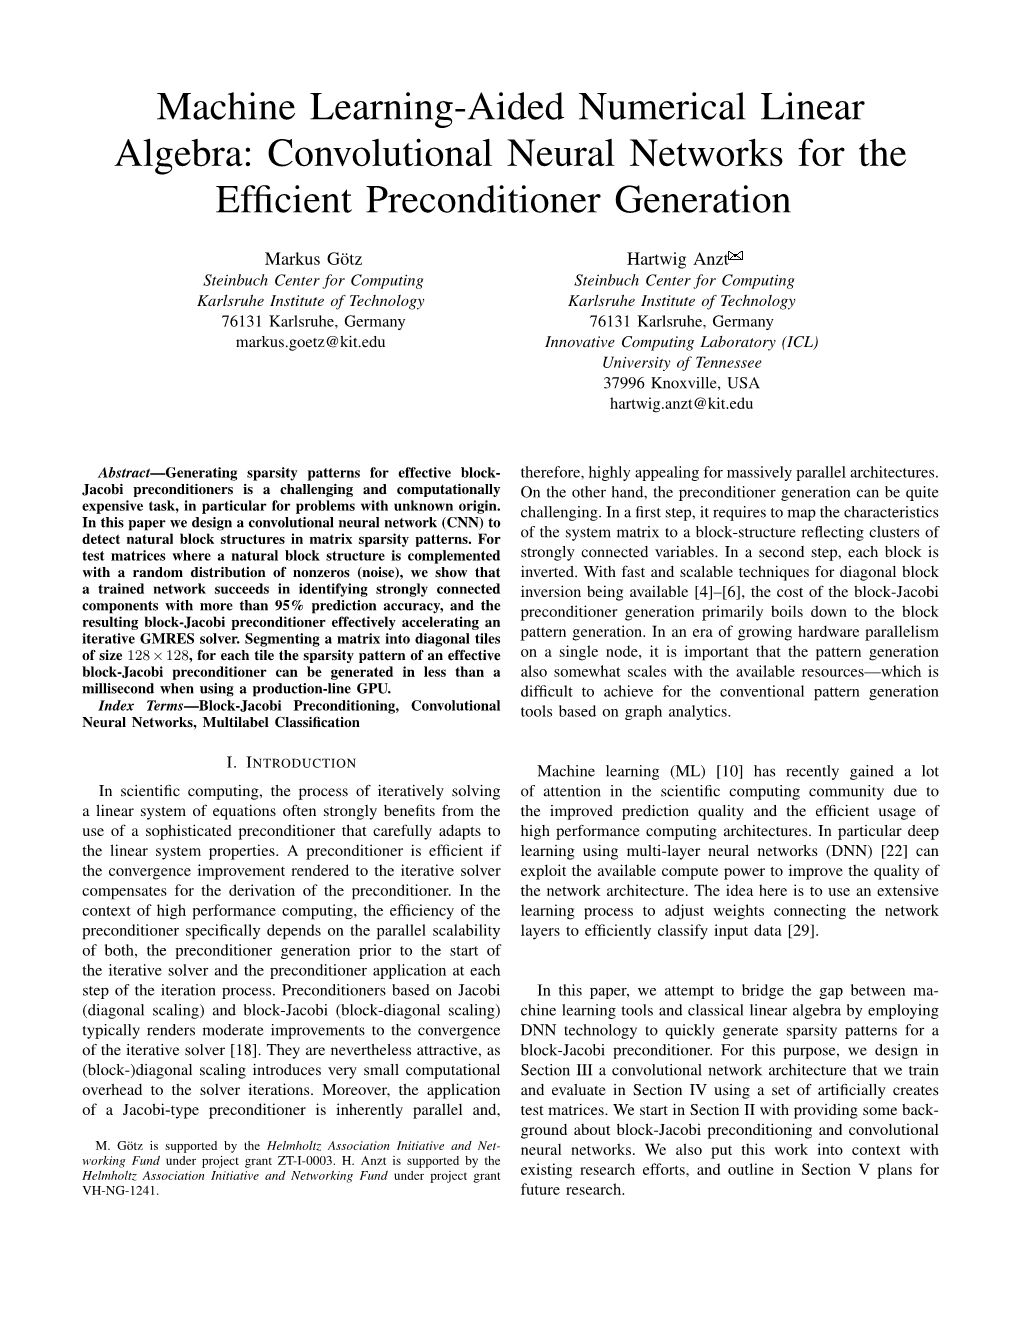 Convolutional Neural Networks for the Efficient Preconditioner Generation